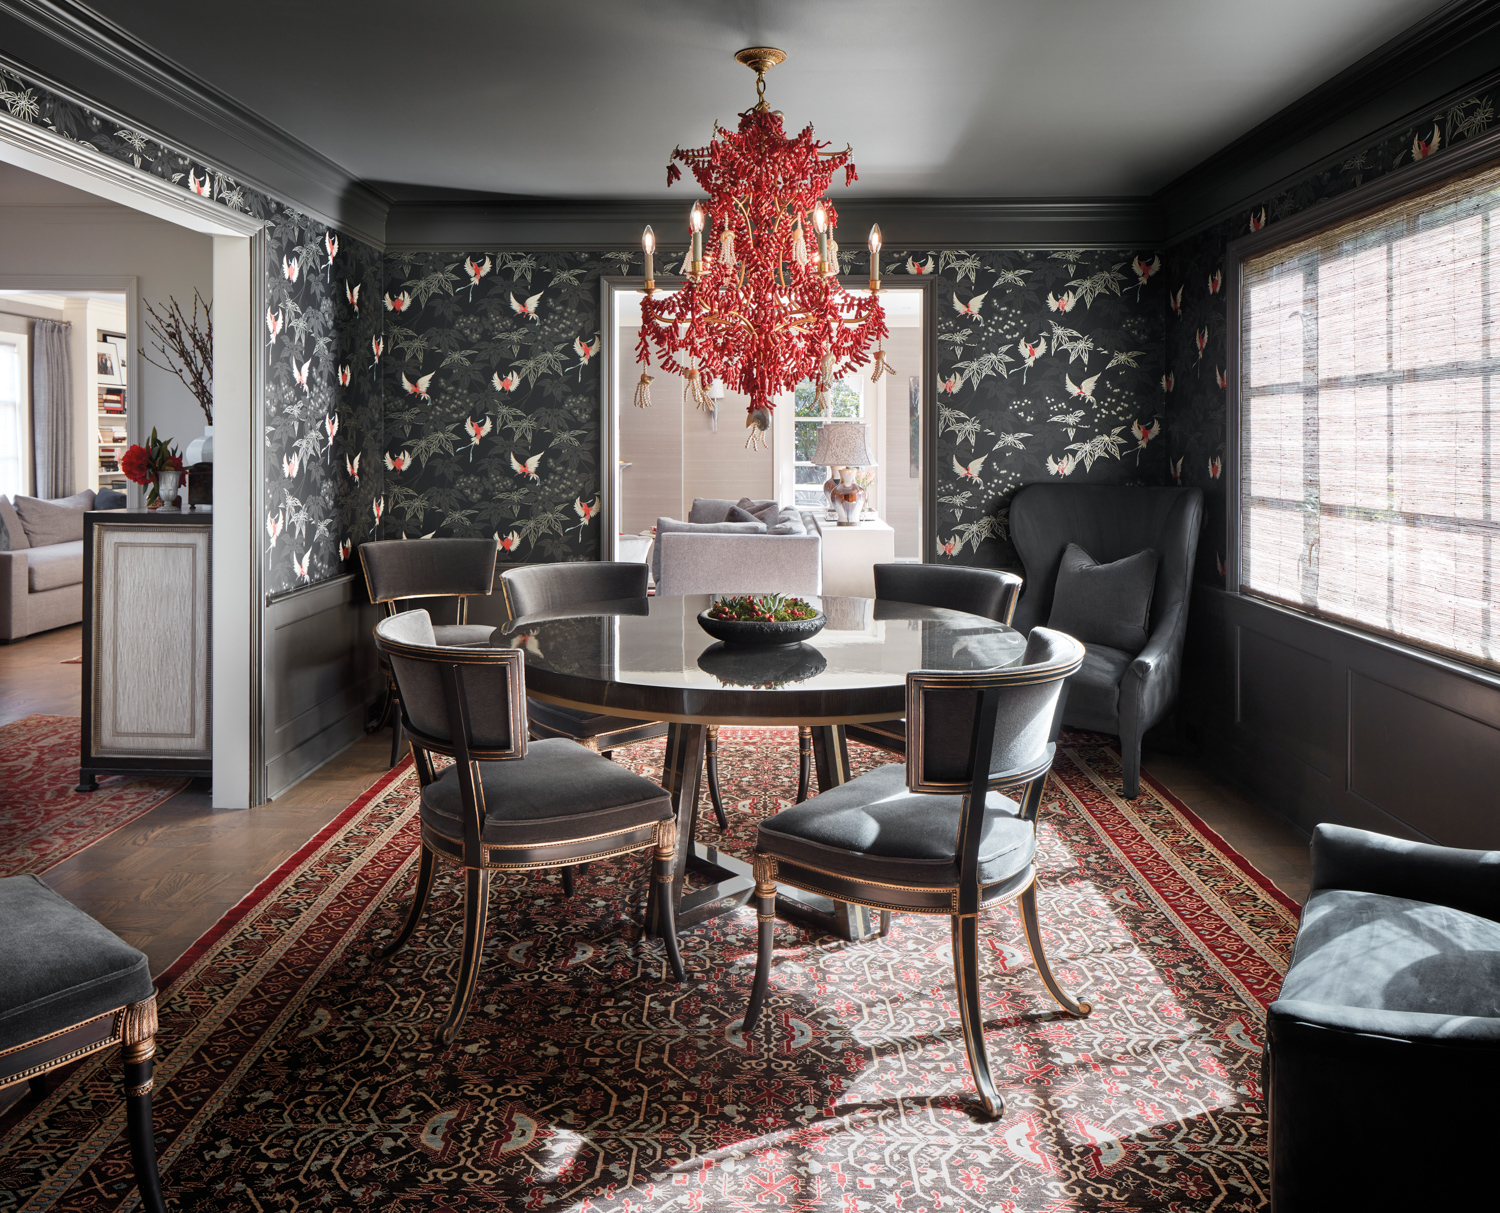 Dining room with a red chandelier, patterned metallic and black wallpaper and black dining set